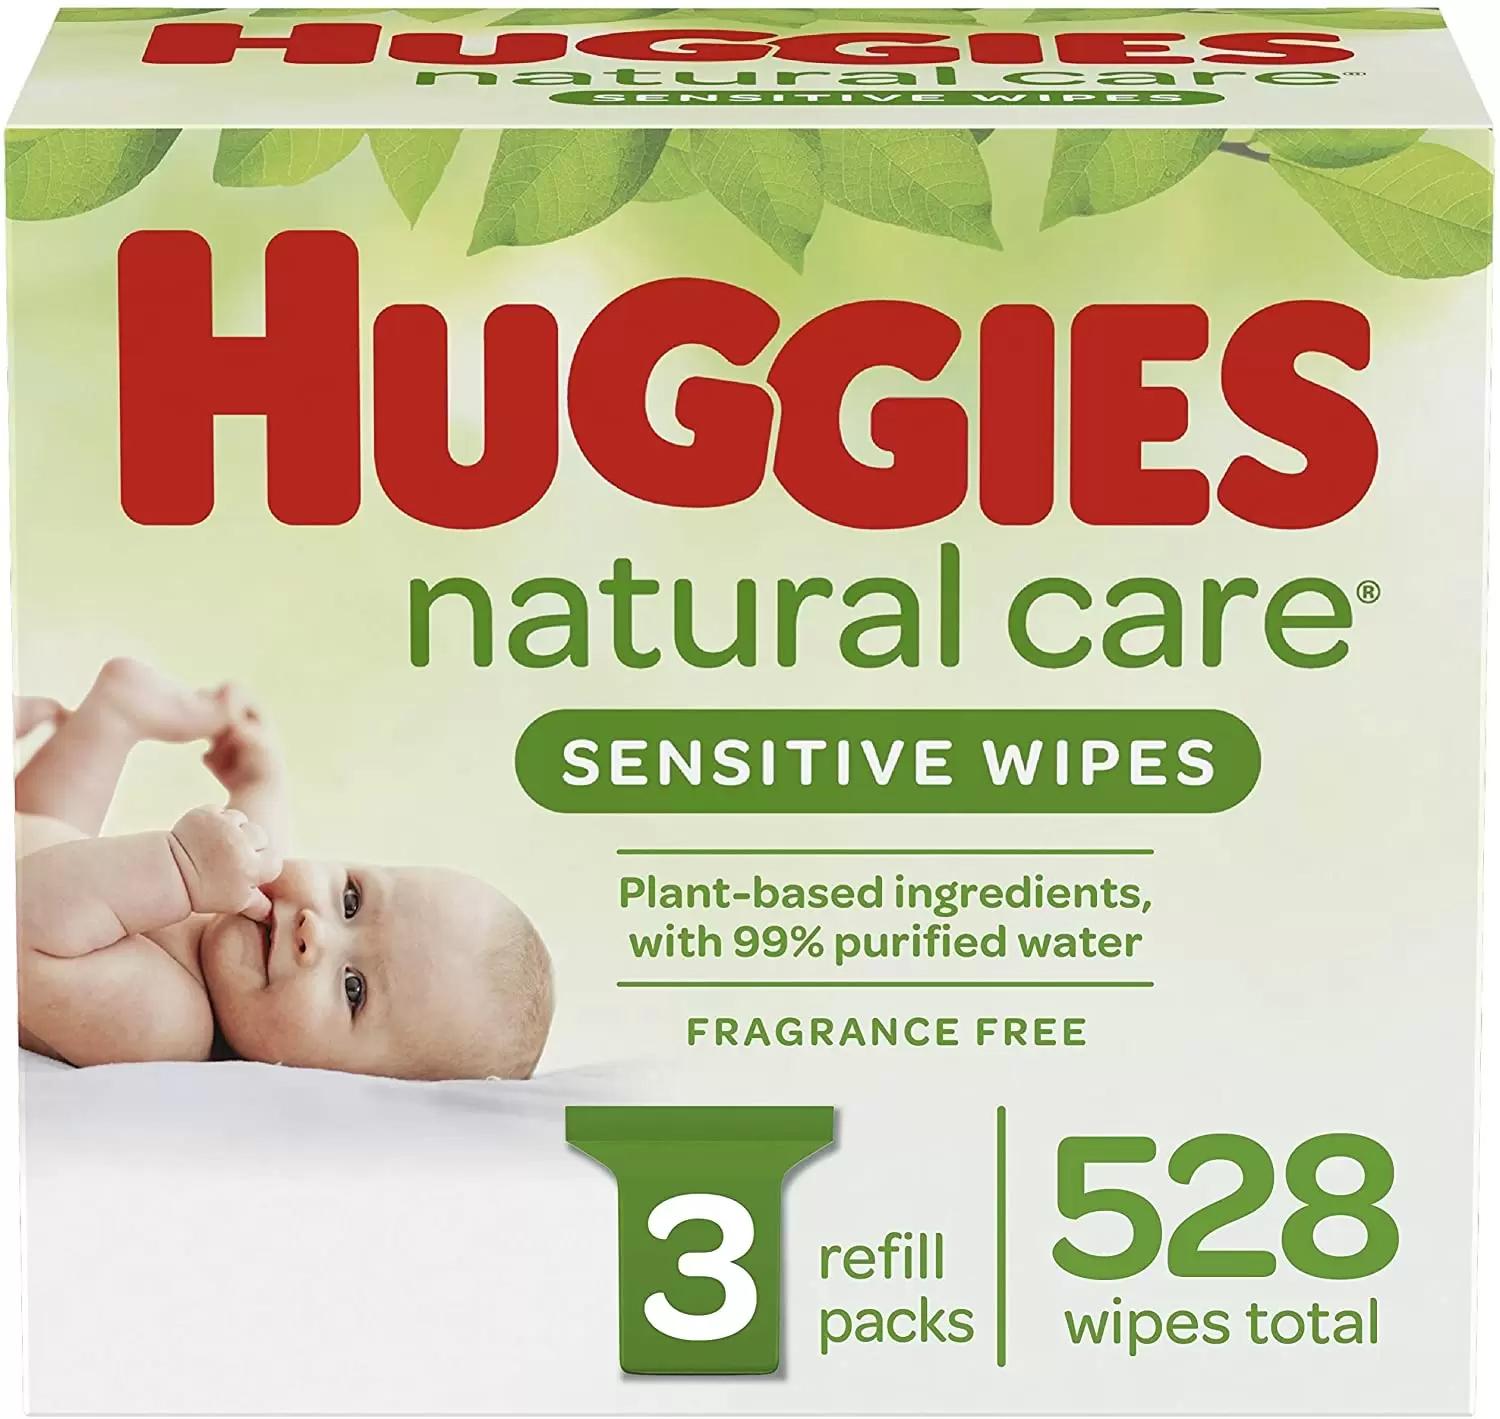 528 Huggies Natural Care Sensitive Baby Wipes for $9.75 Shipped